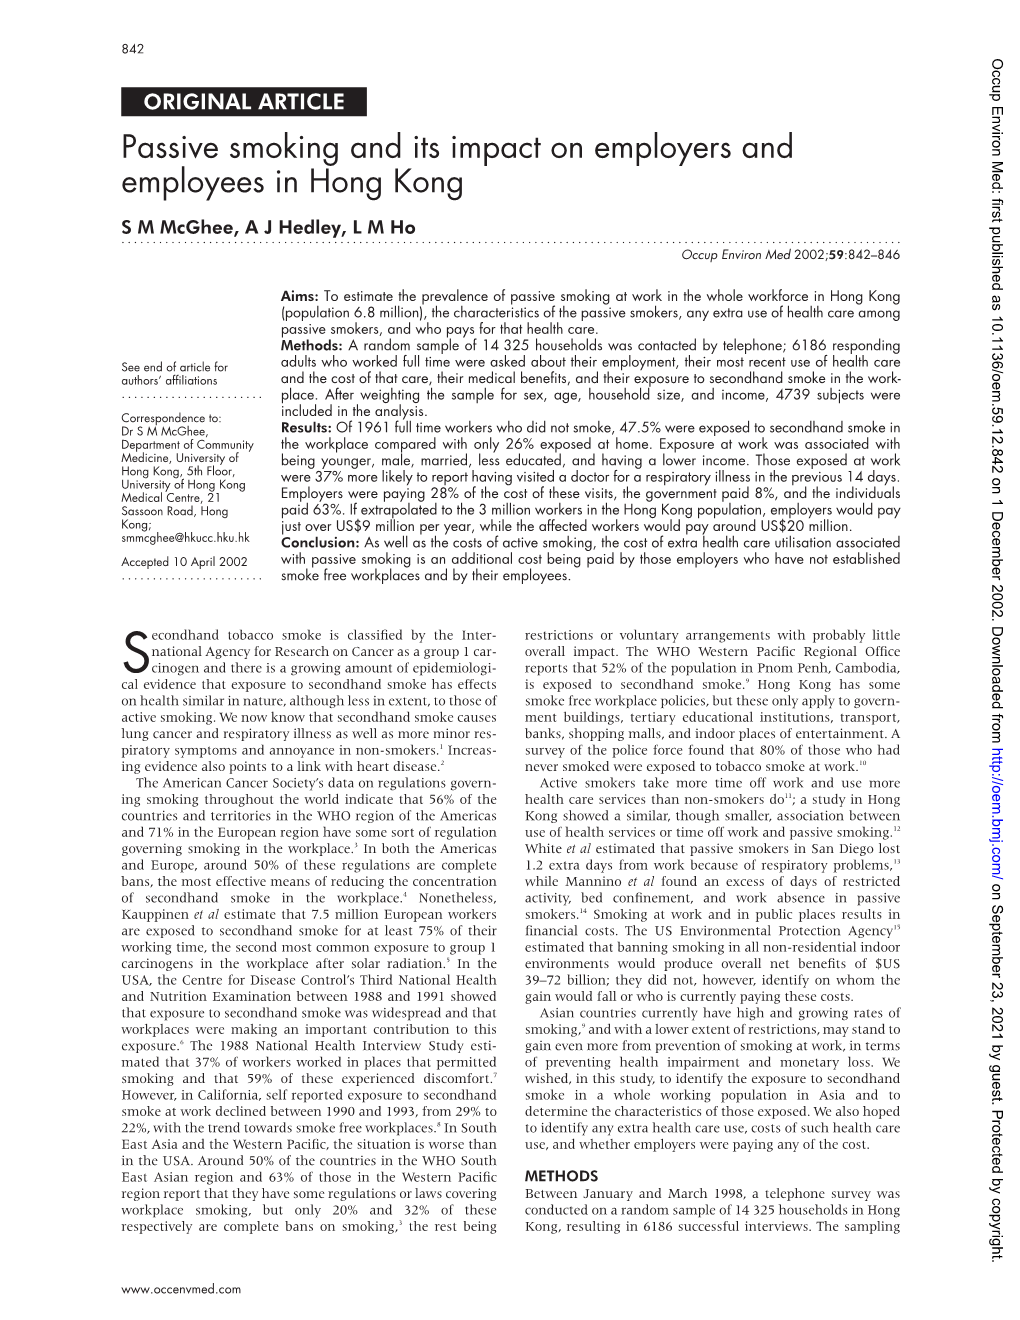 Passive Smoking and Its Impact on Employers and Employees in Hong Kong S M Mcghee, a J Hedley,Lmho